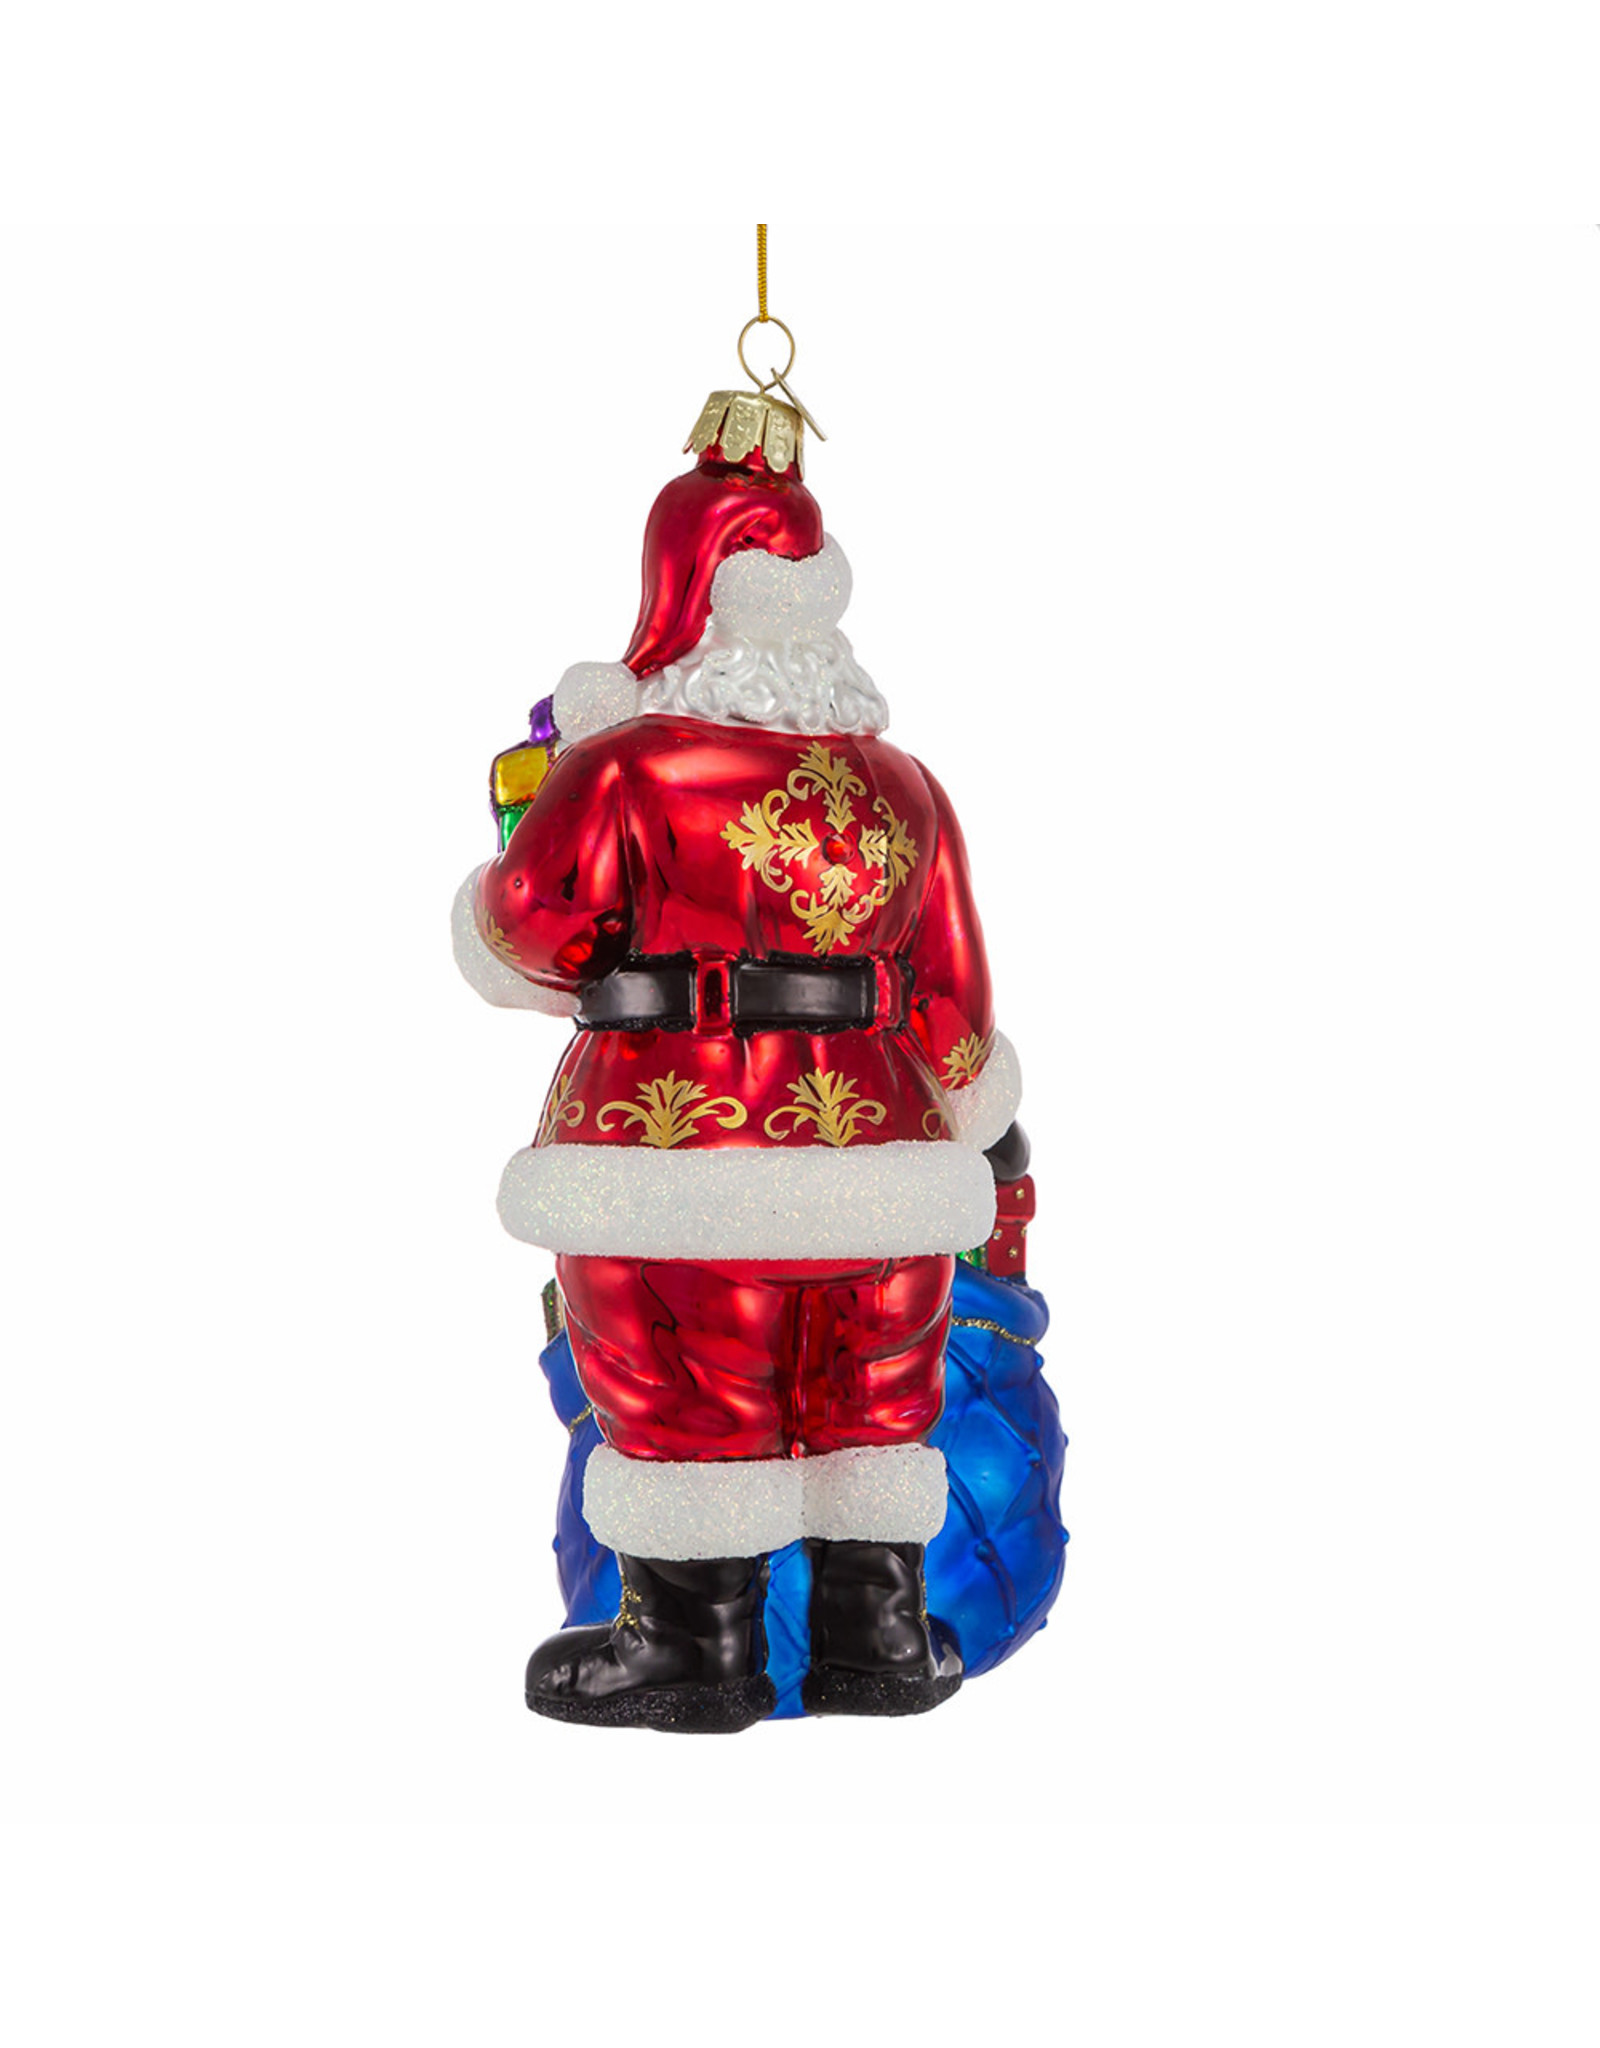 Kurt Adler Bellissimo Glass Santa With Toys n Gifts Ornament 7 Inch